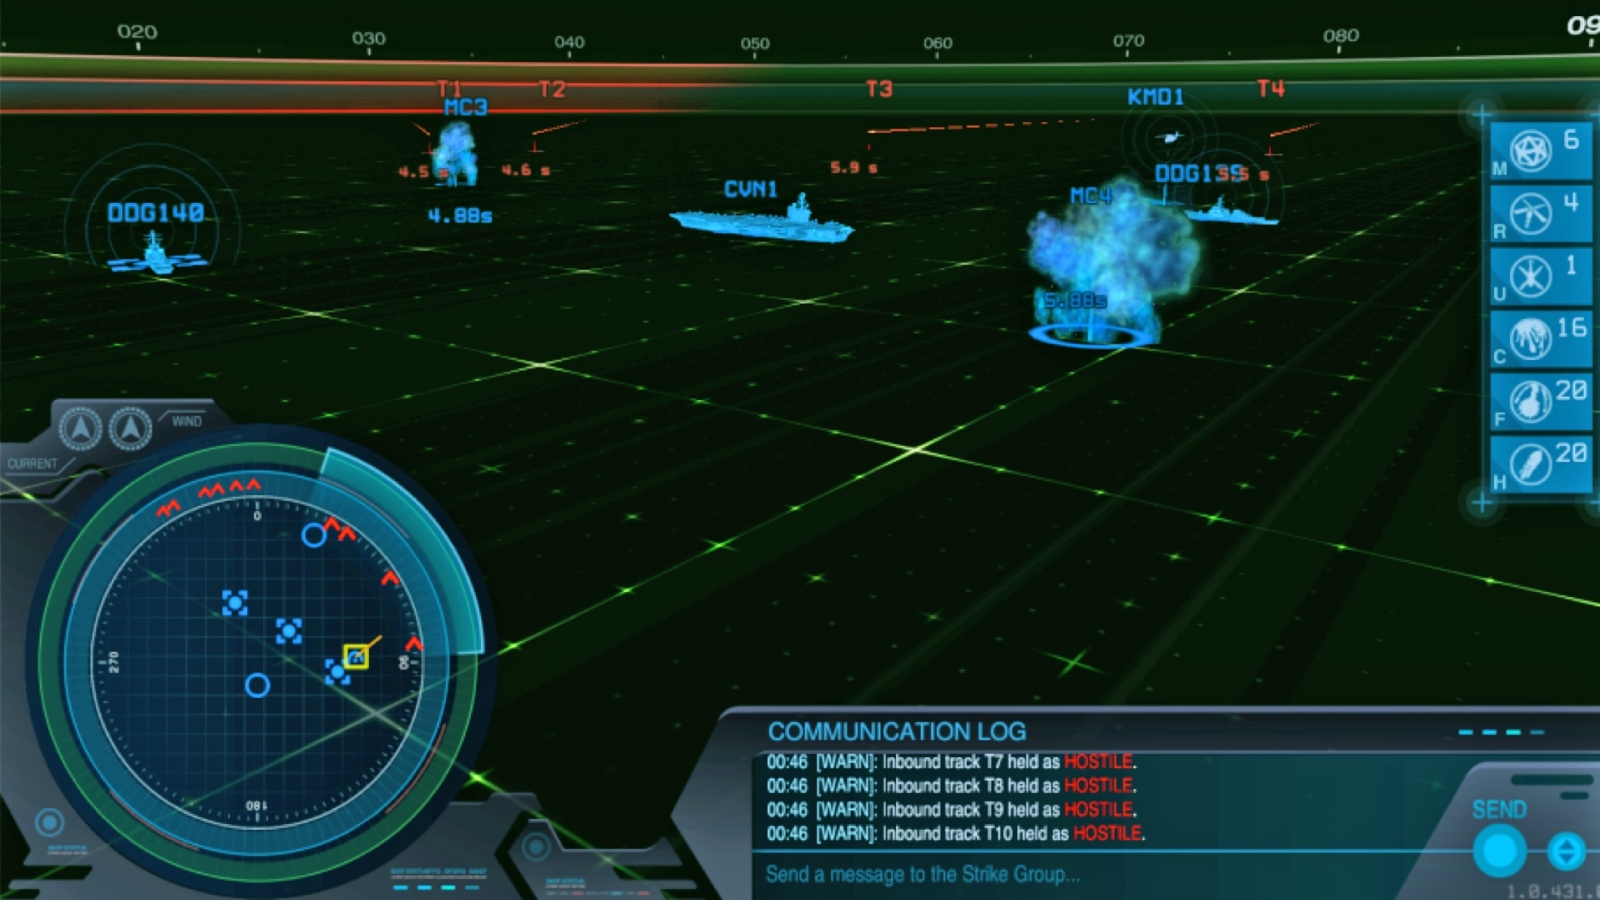 Strike Group Defender immerses users in realistic simulations to help them learn how to defend ships against missile threats in real life. 